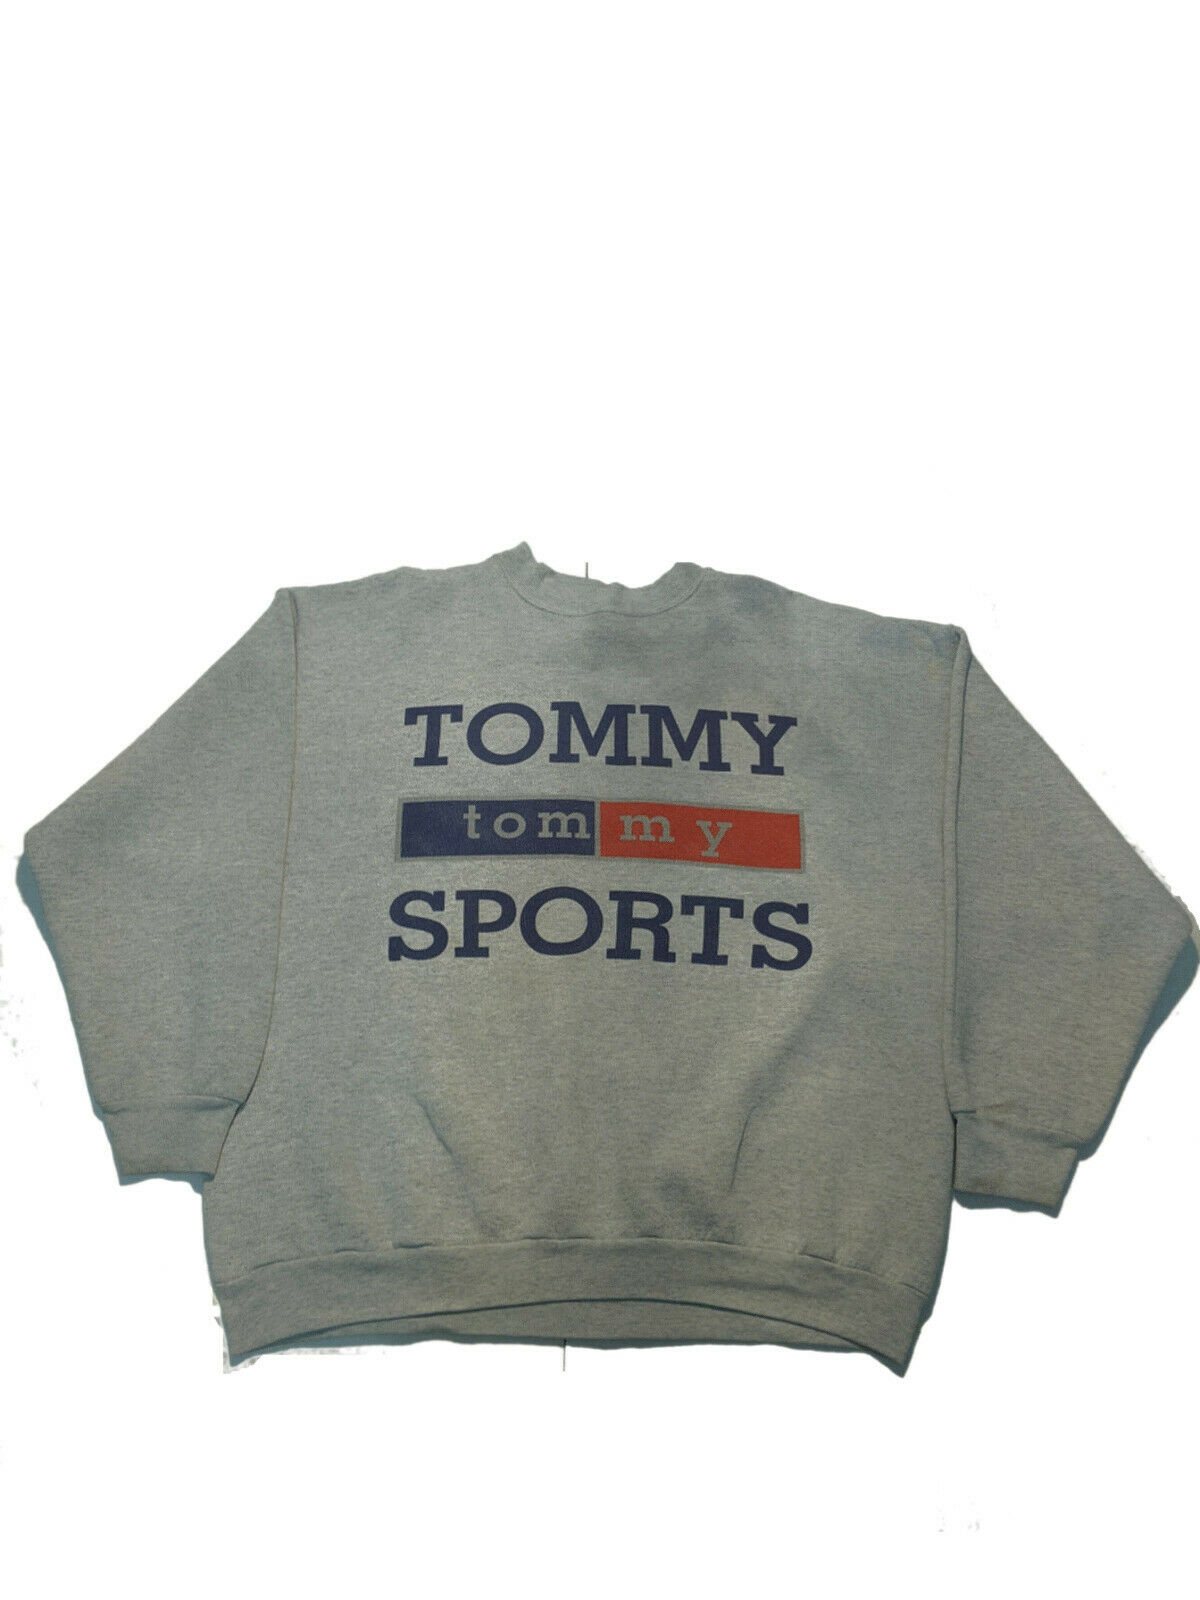 Tultex Tommy Sports Xl Gray Vintage 1990s Big Spell Out Logo Sweater